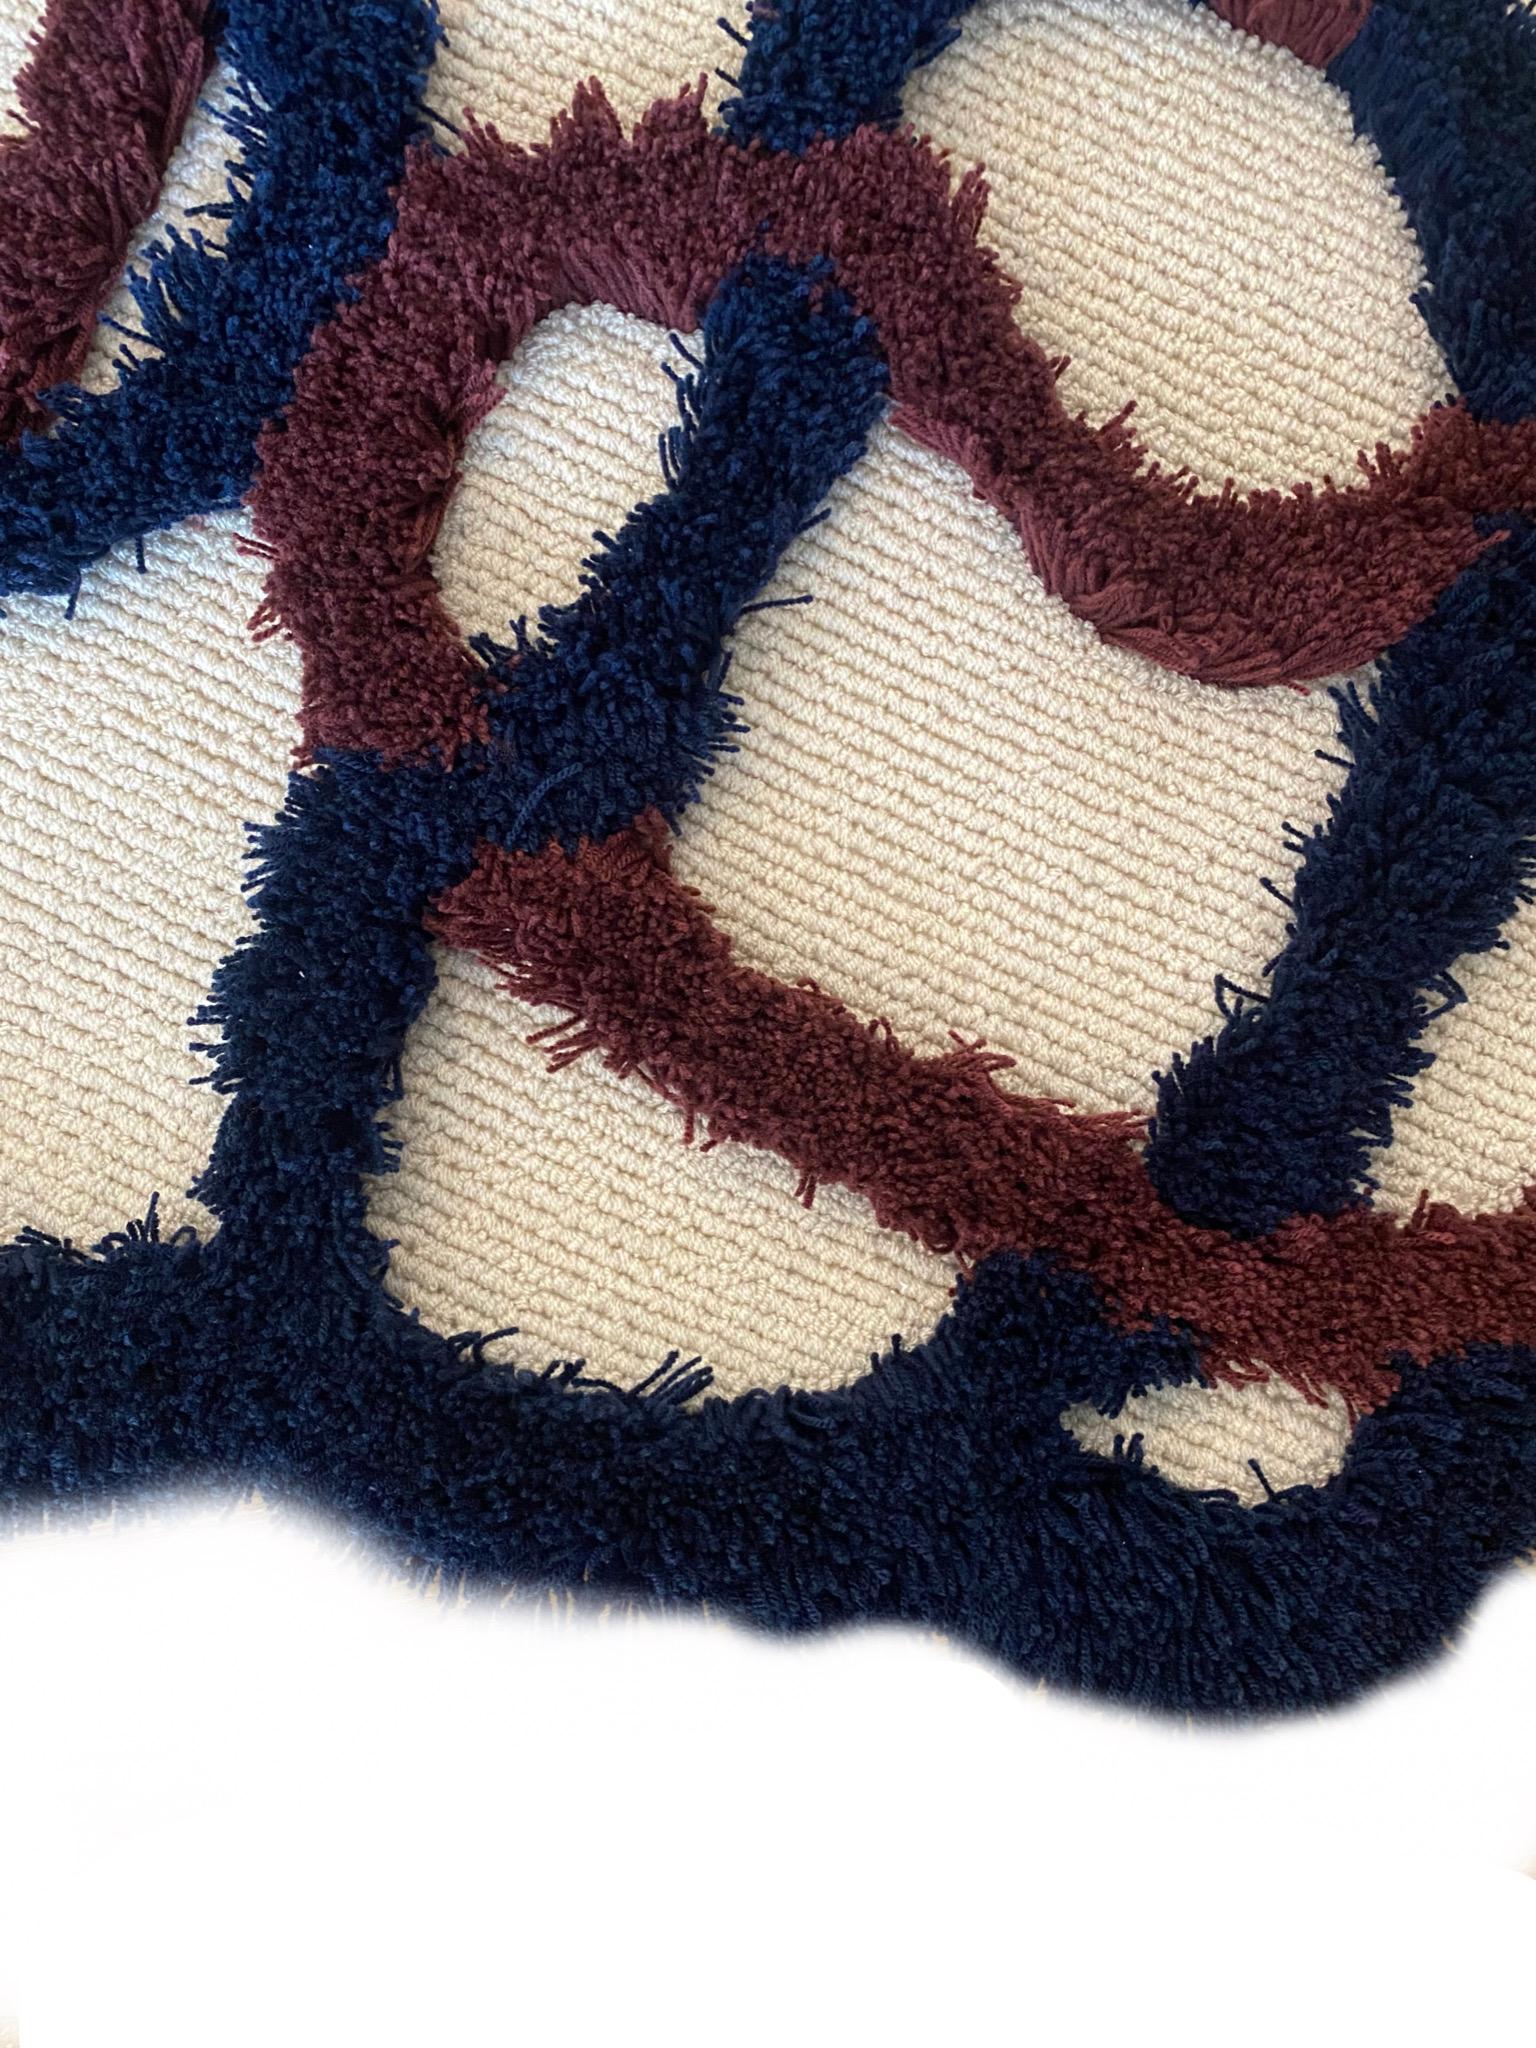 'Crosses Circulation' 
Contemporary irregular shape shaggy maroon blue and beige rug '' by RAG Home

Original Designed by RAG Home Jakarta
Hand-tufted carpet with mixed carving embossed methods and colours. 
It can be customised in size. Made by